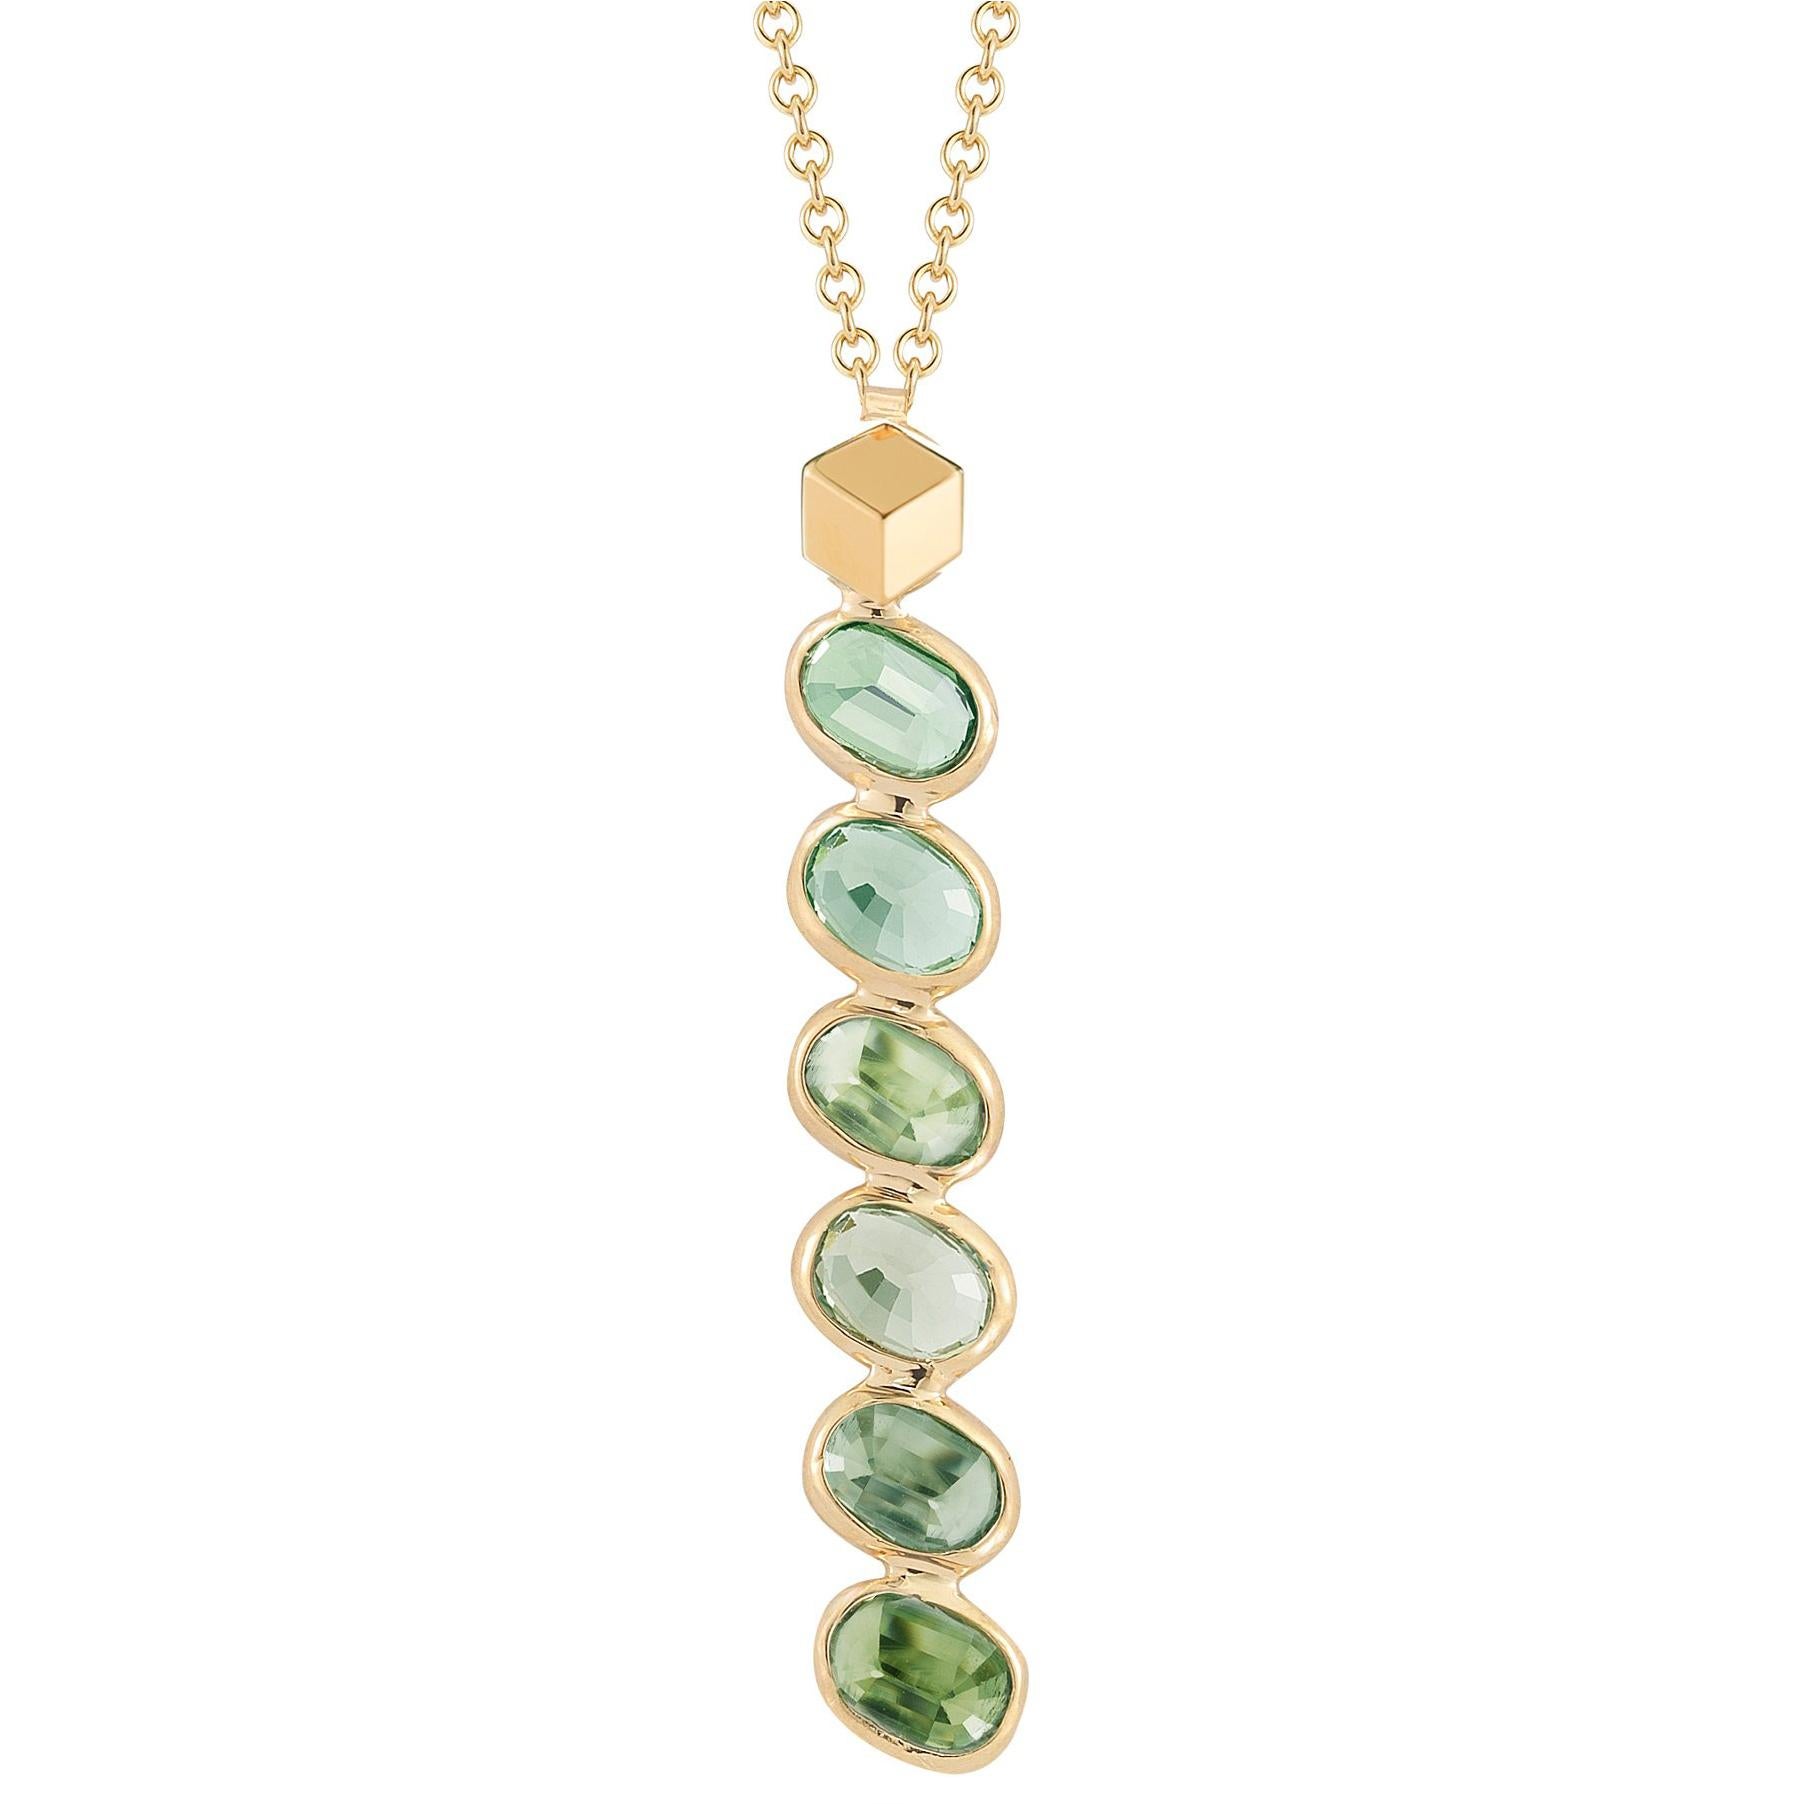 Paolo Costagli 18 Karat Yellow Gold Green Sapphires Ombré Pendant Necklace For Sale